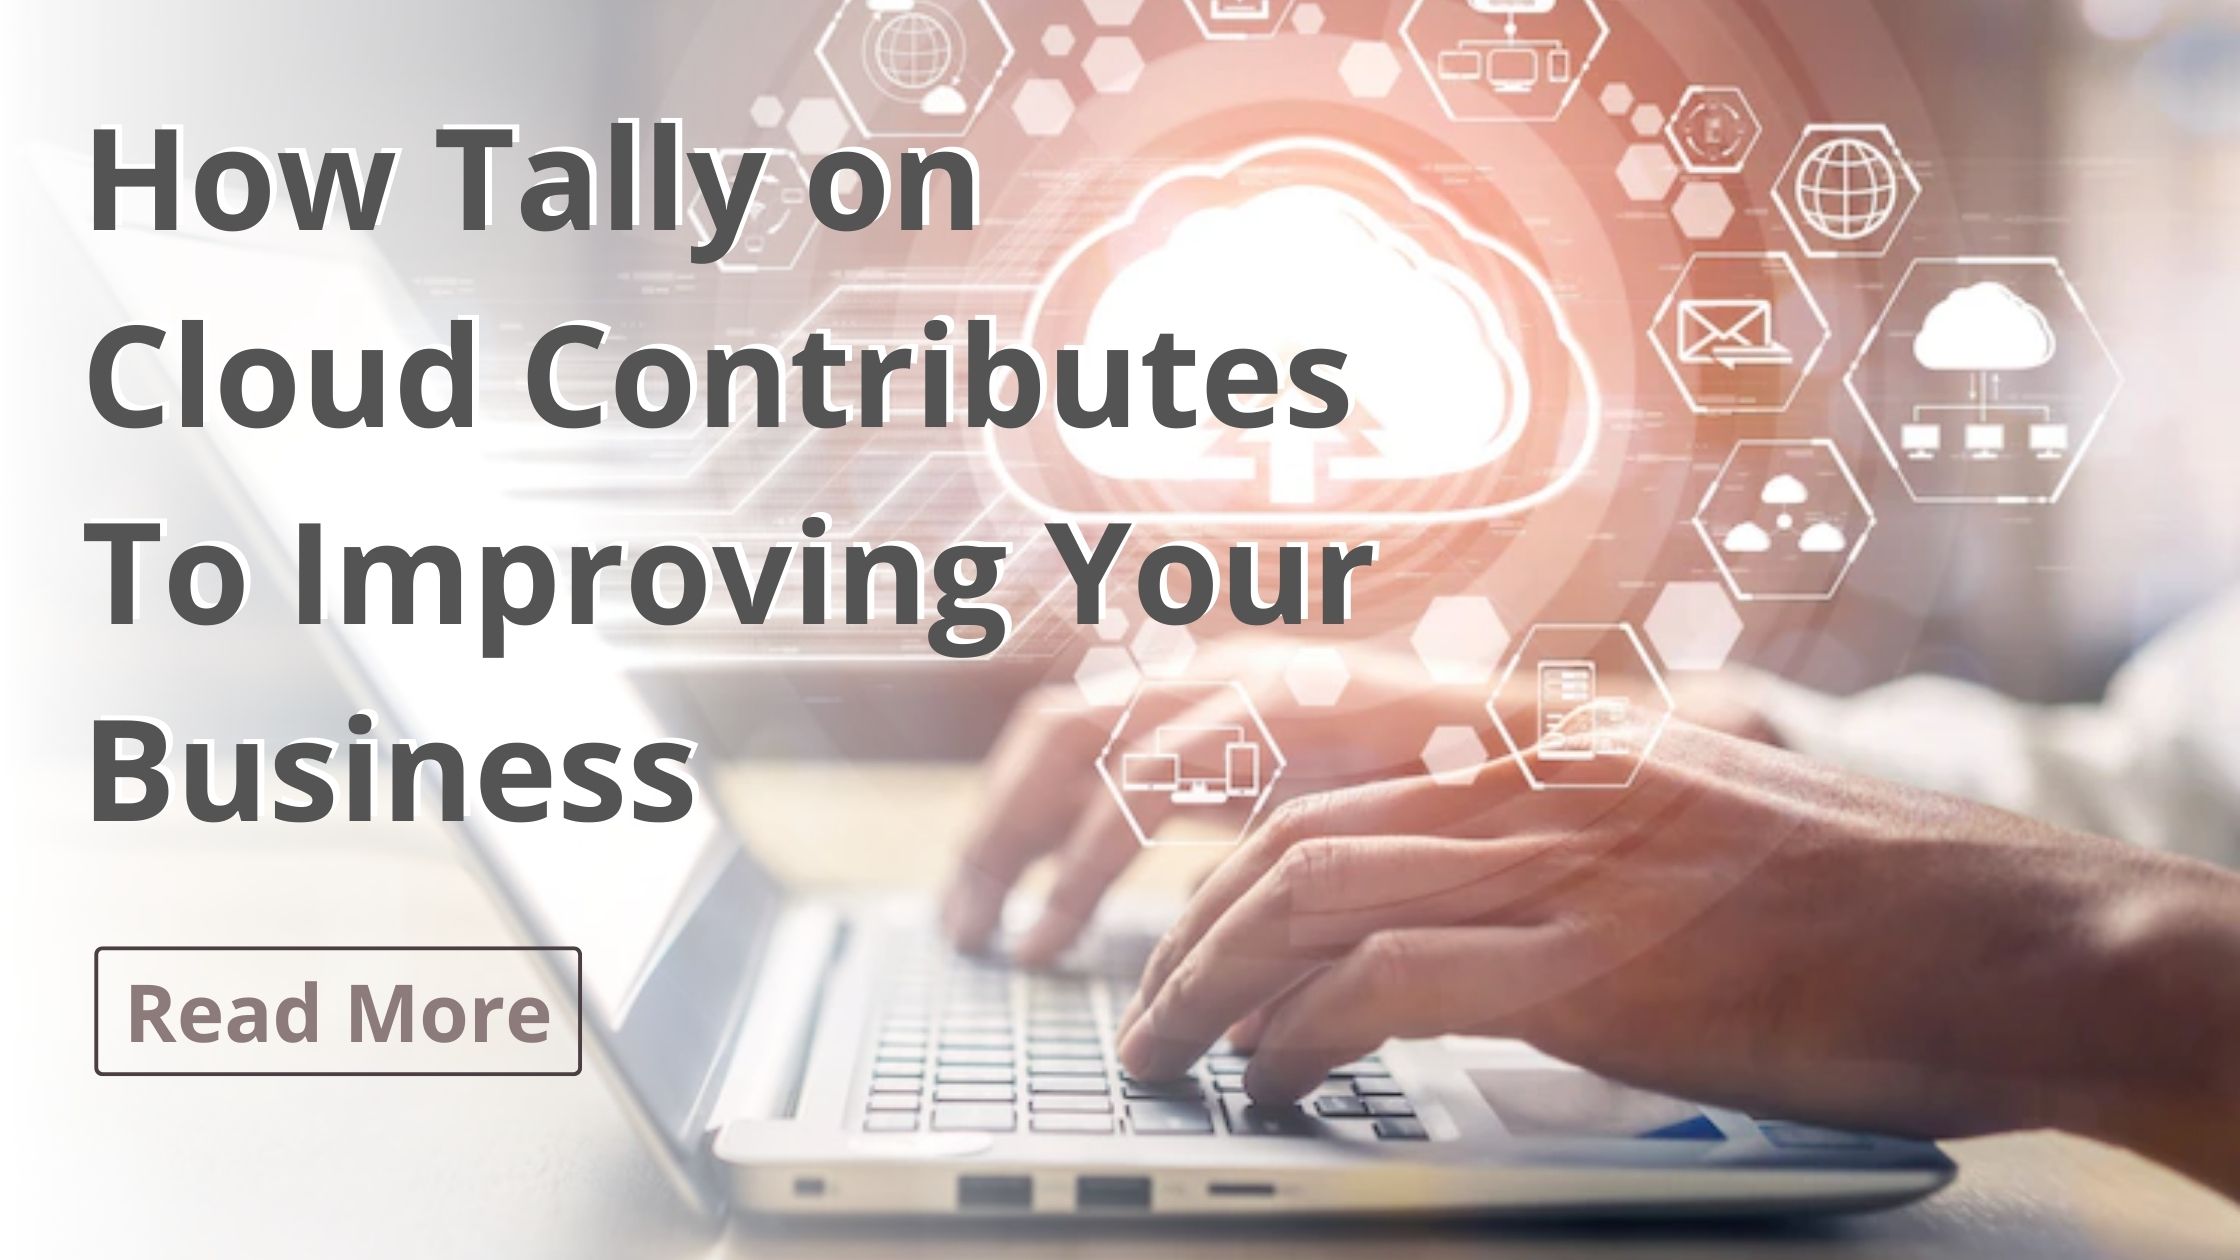 Tally on Cloud for business